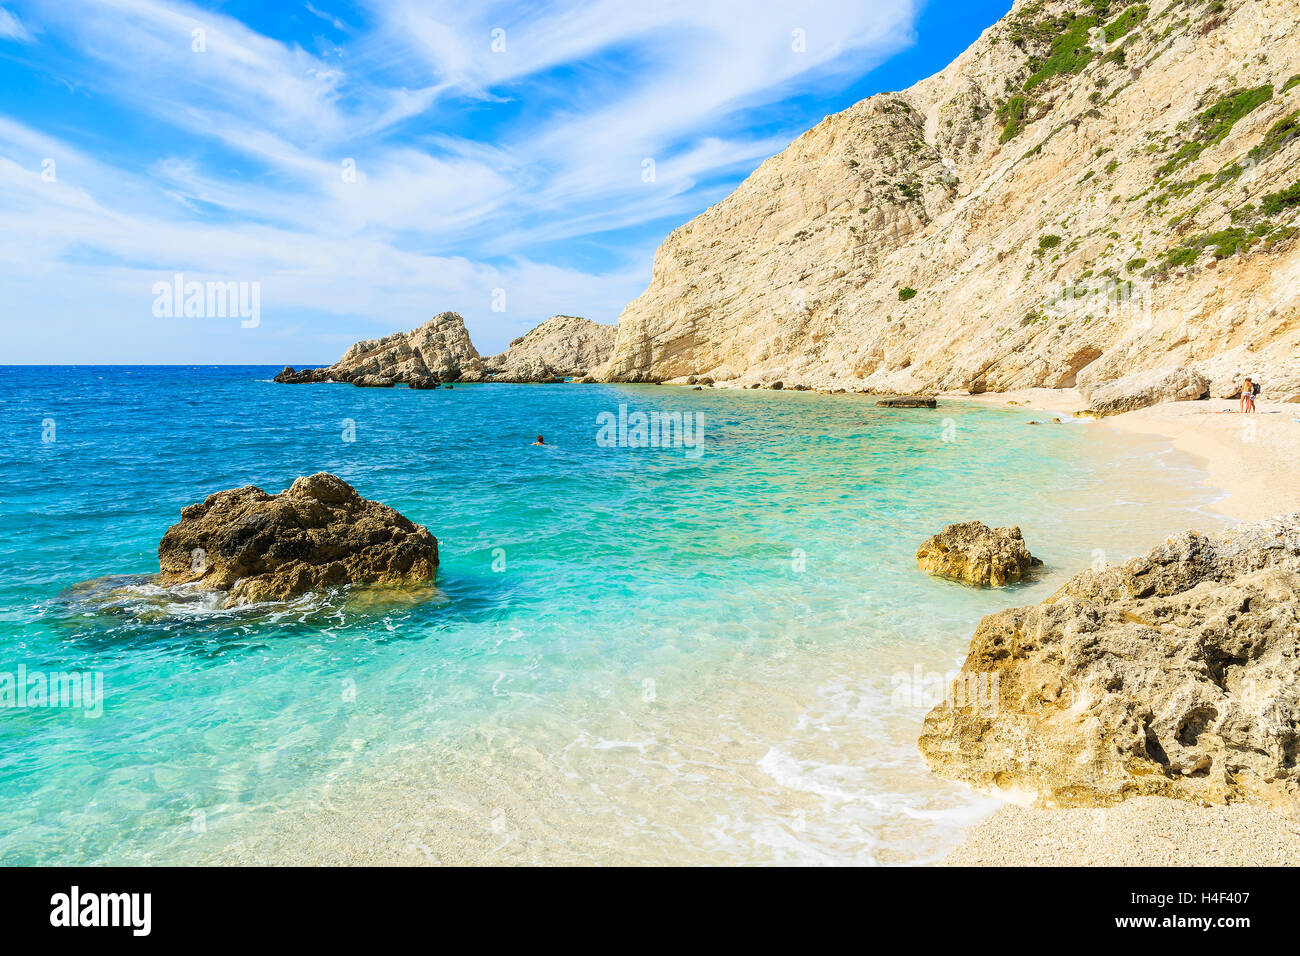 View of beautiful beach with rock cliffs on Kefalonia island, Greece Stock Photo